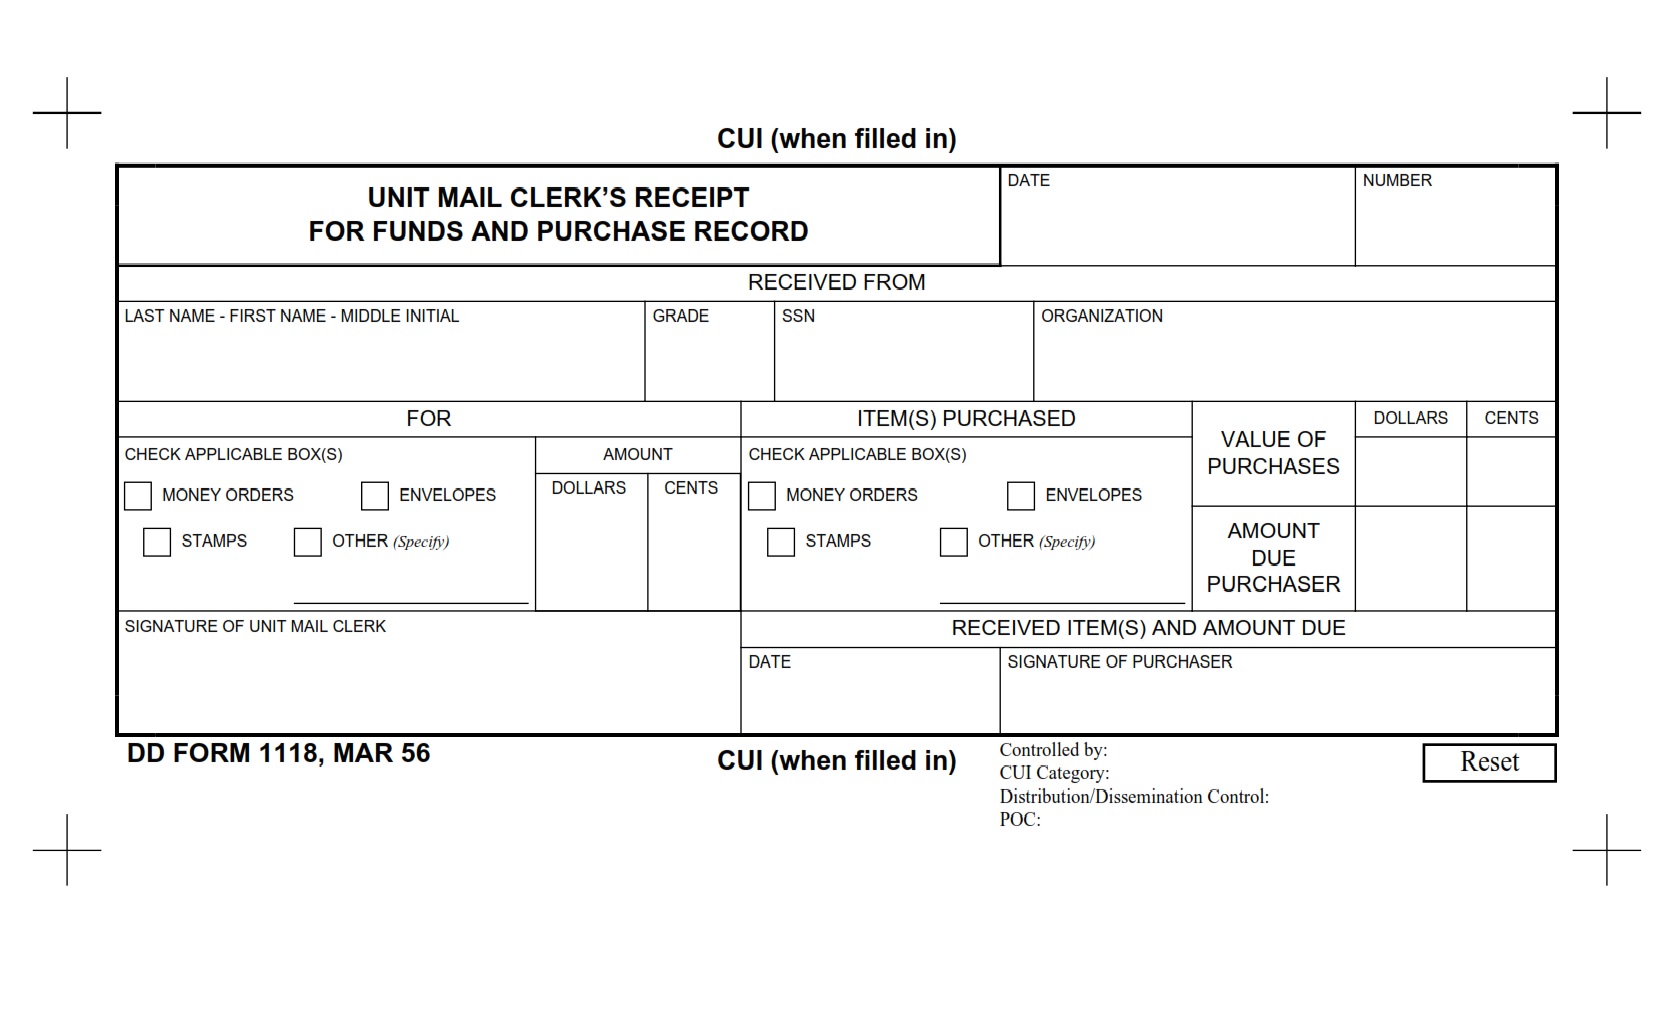 DD Form 1118 Unit Mail Clerk s Receipt For Funds And Purchase Record 